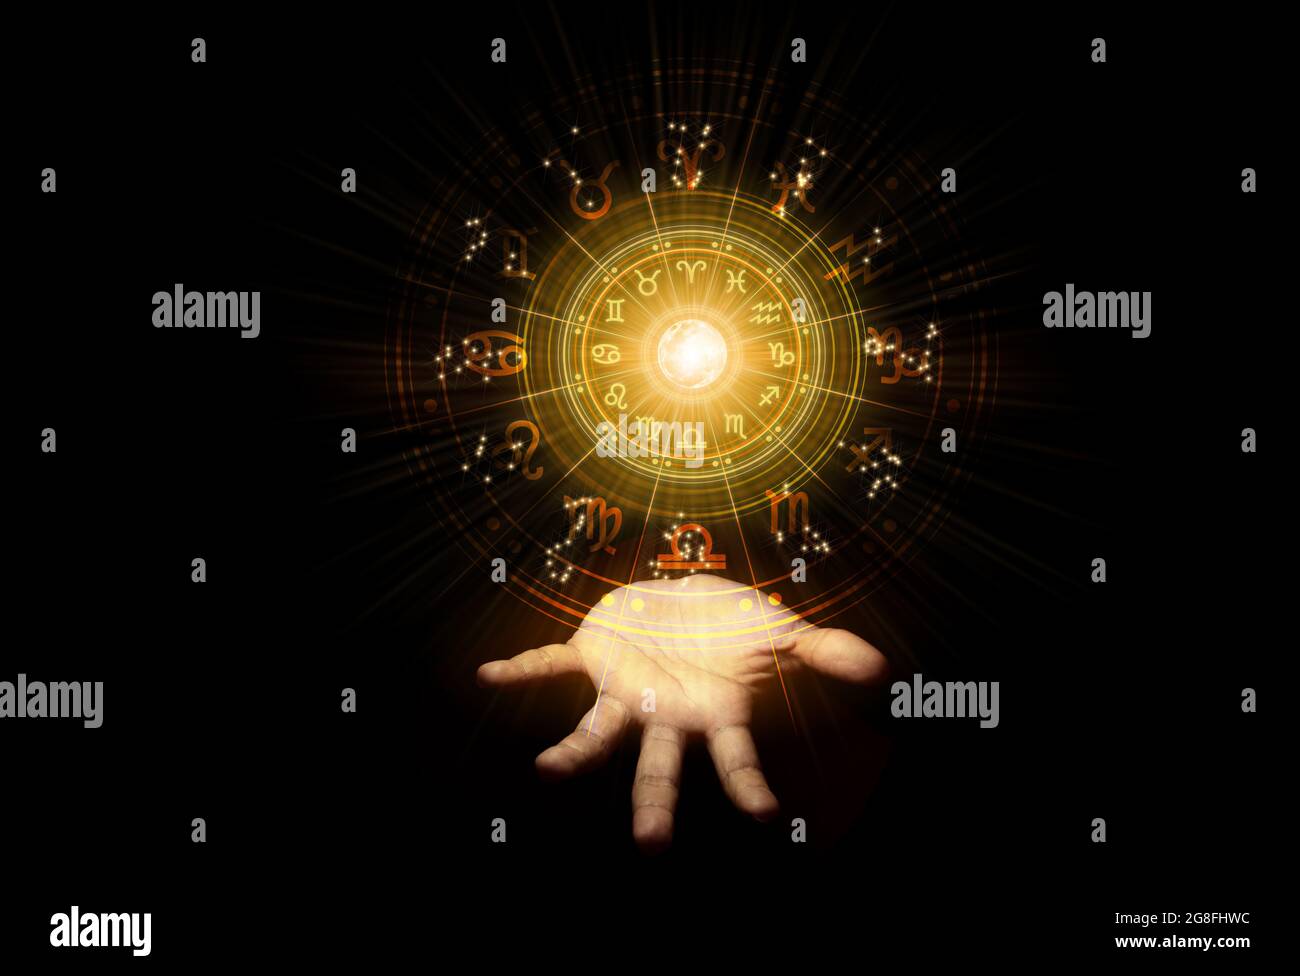 Zodiac signs inside of horoscope circle. Astrology in the sky with many stars and moons astrology and horoscopes concept. Stock Photo